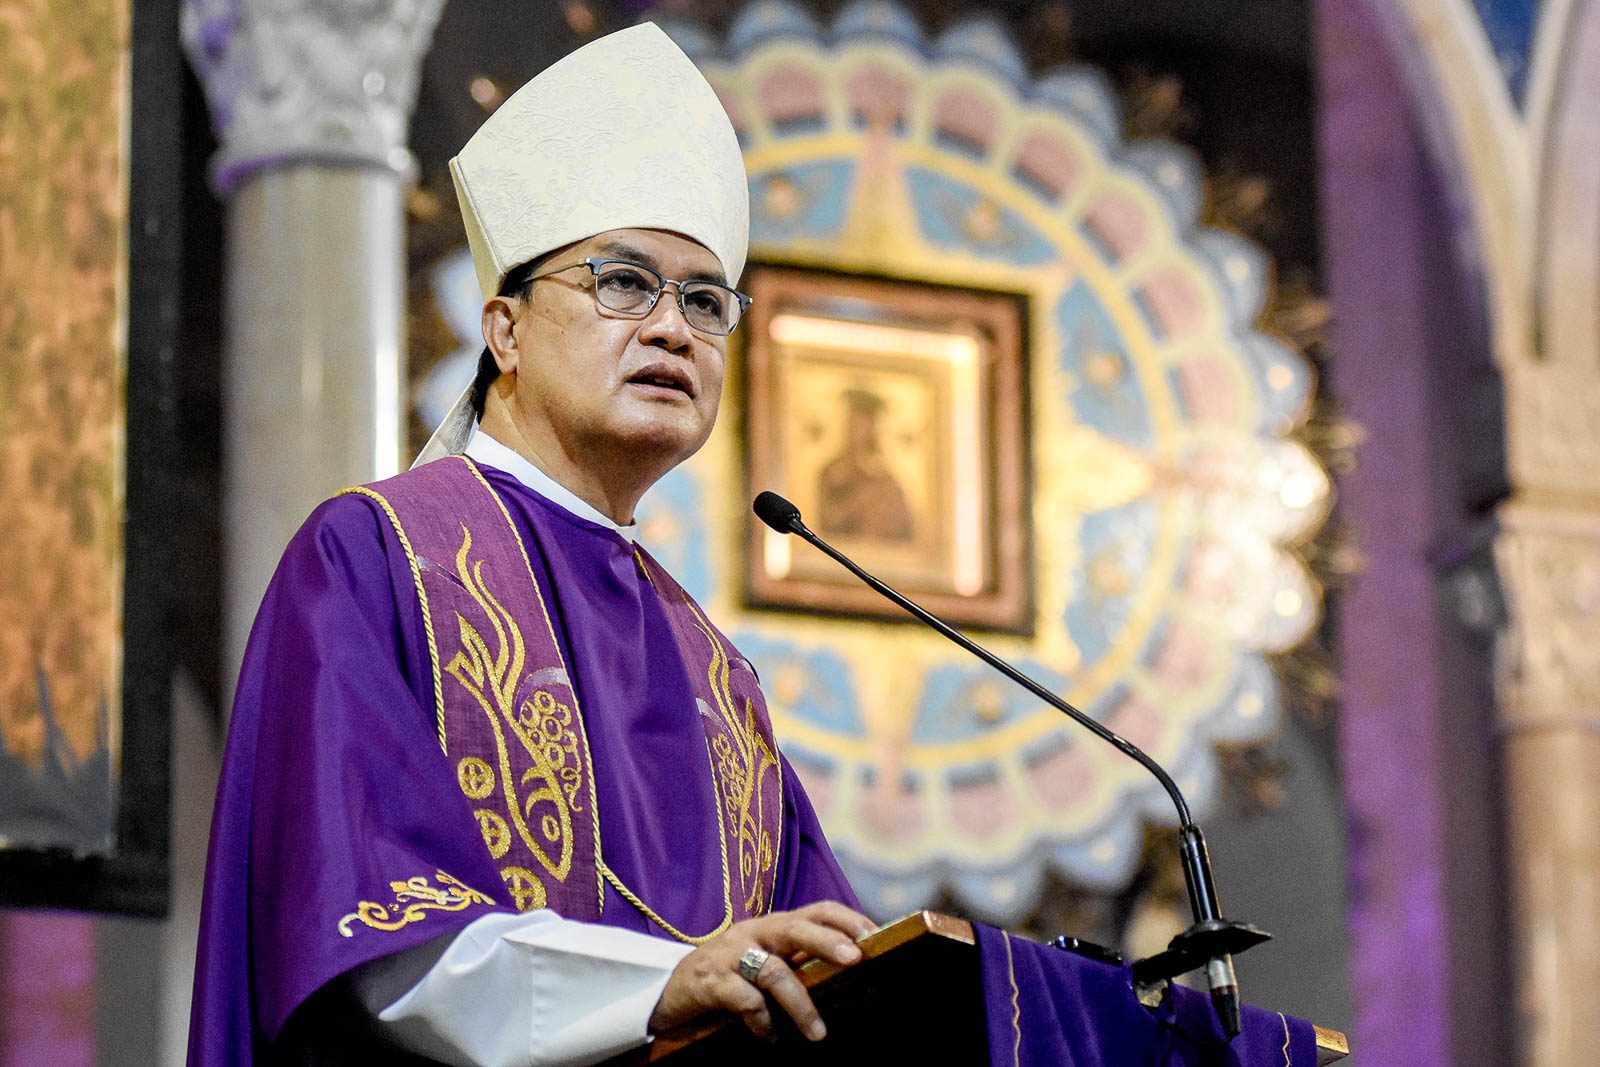 Cbcp Calls For 3 Days Of Intense Prayer Ahead Of May 9 Polls